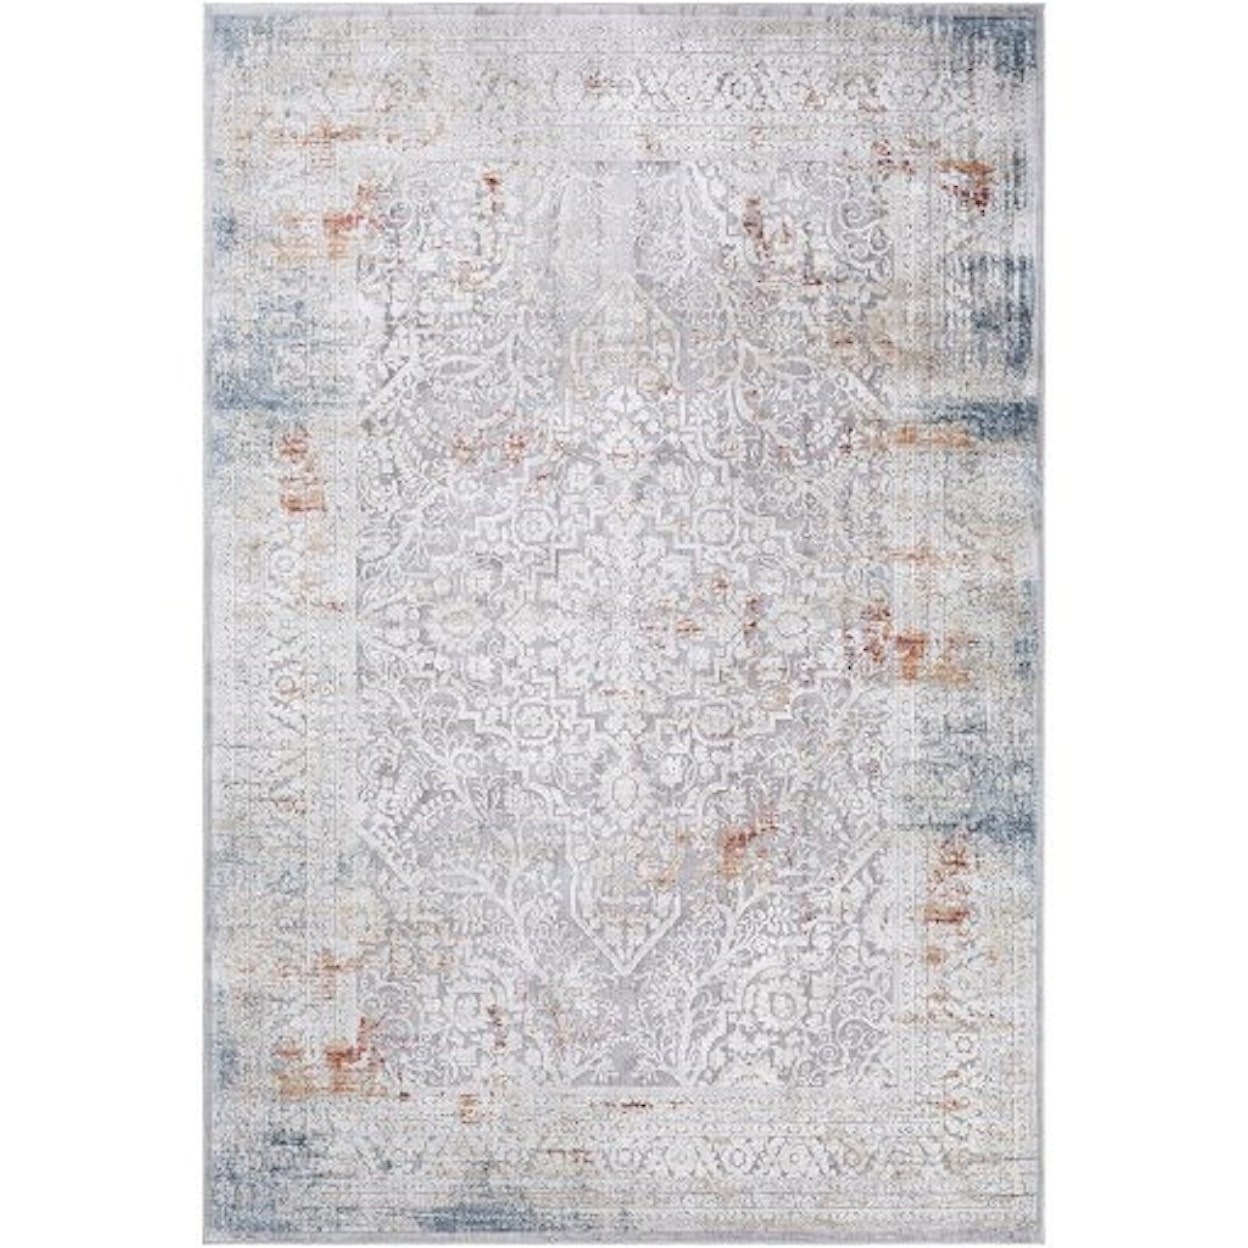 Ruby-Gordon Accents Norland 2'7" x 4' Rug